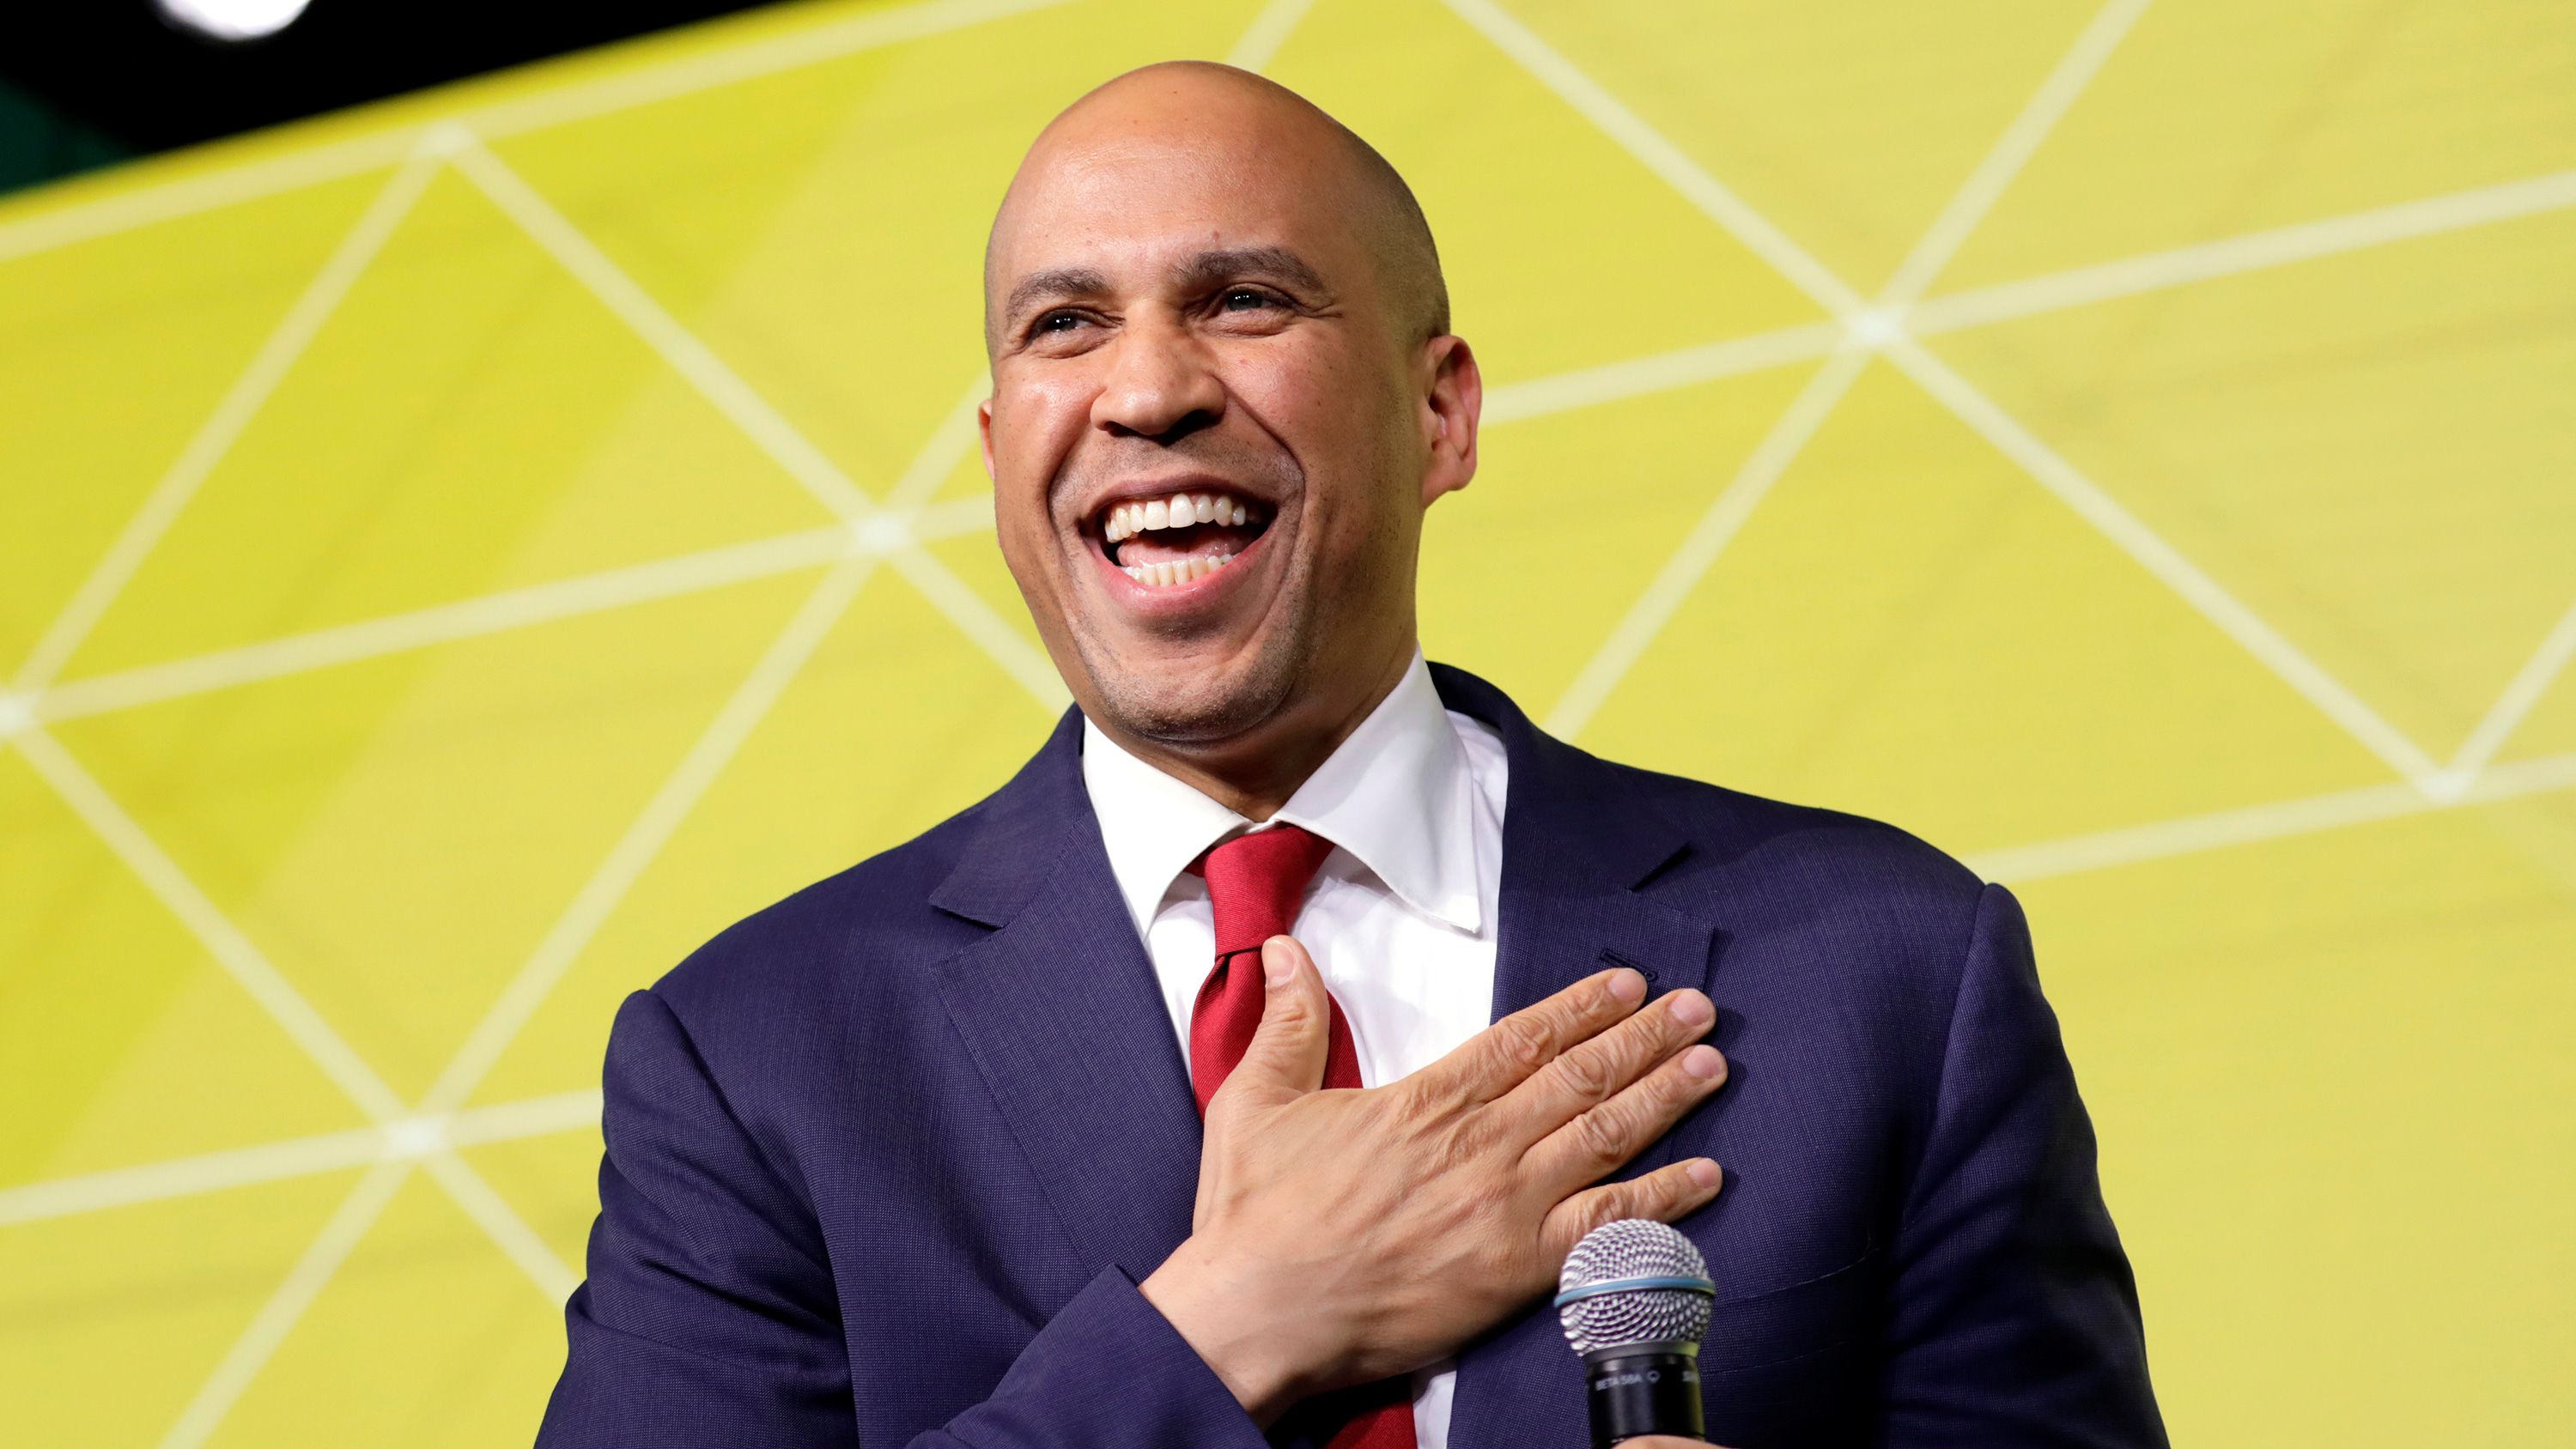 Sen. Cory Booker Faces Criticism for Wearing Pink Booty Shorts at